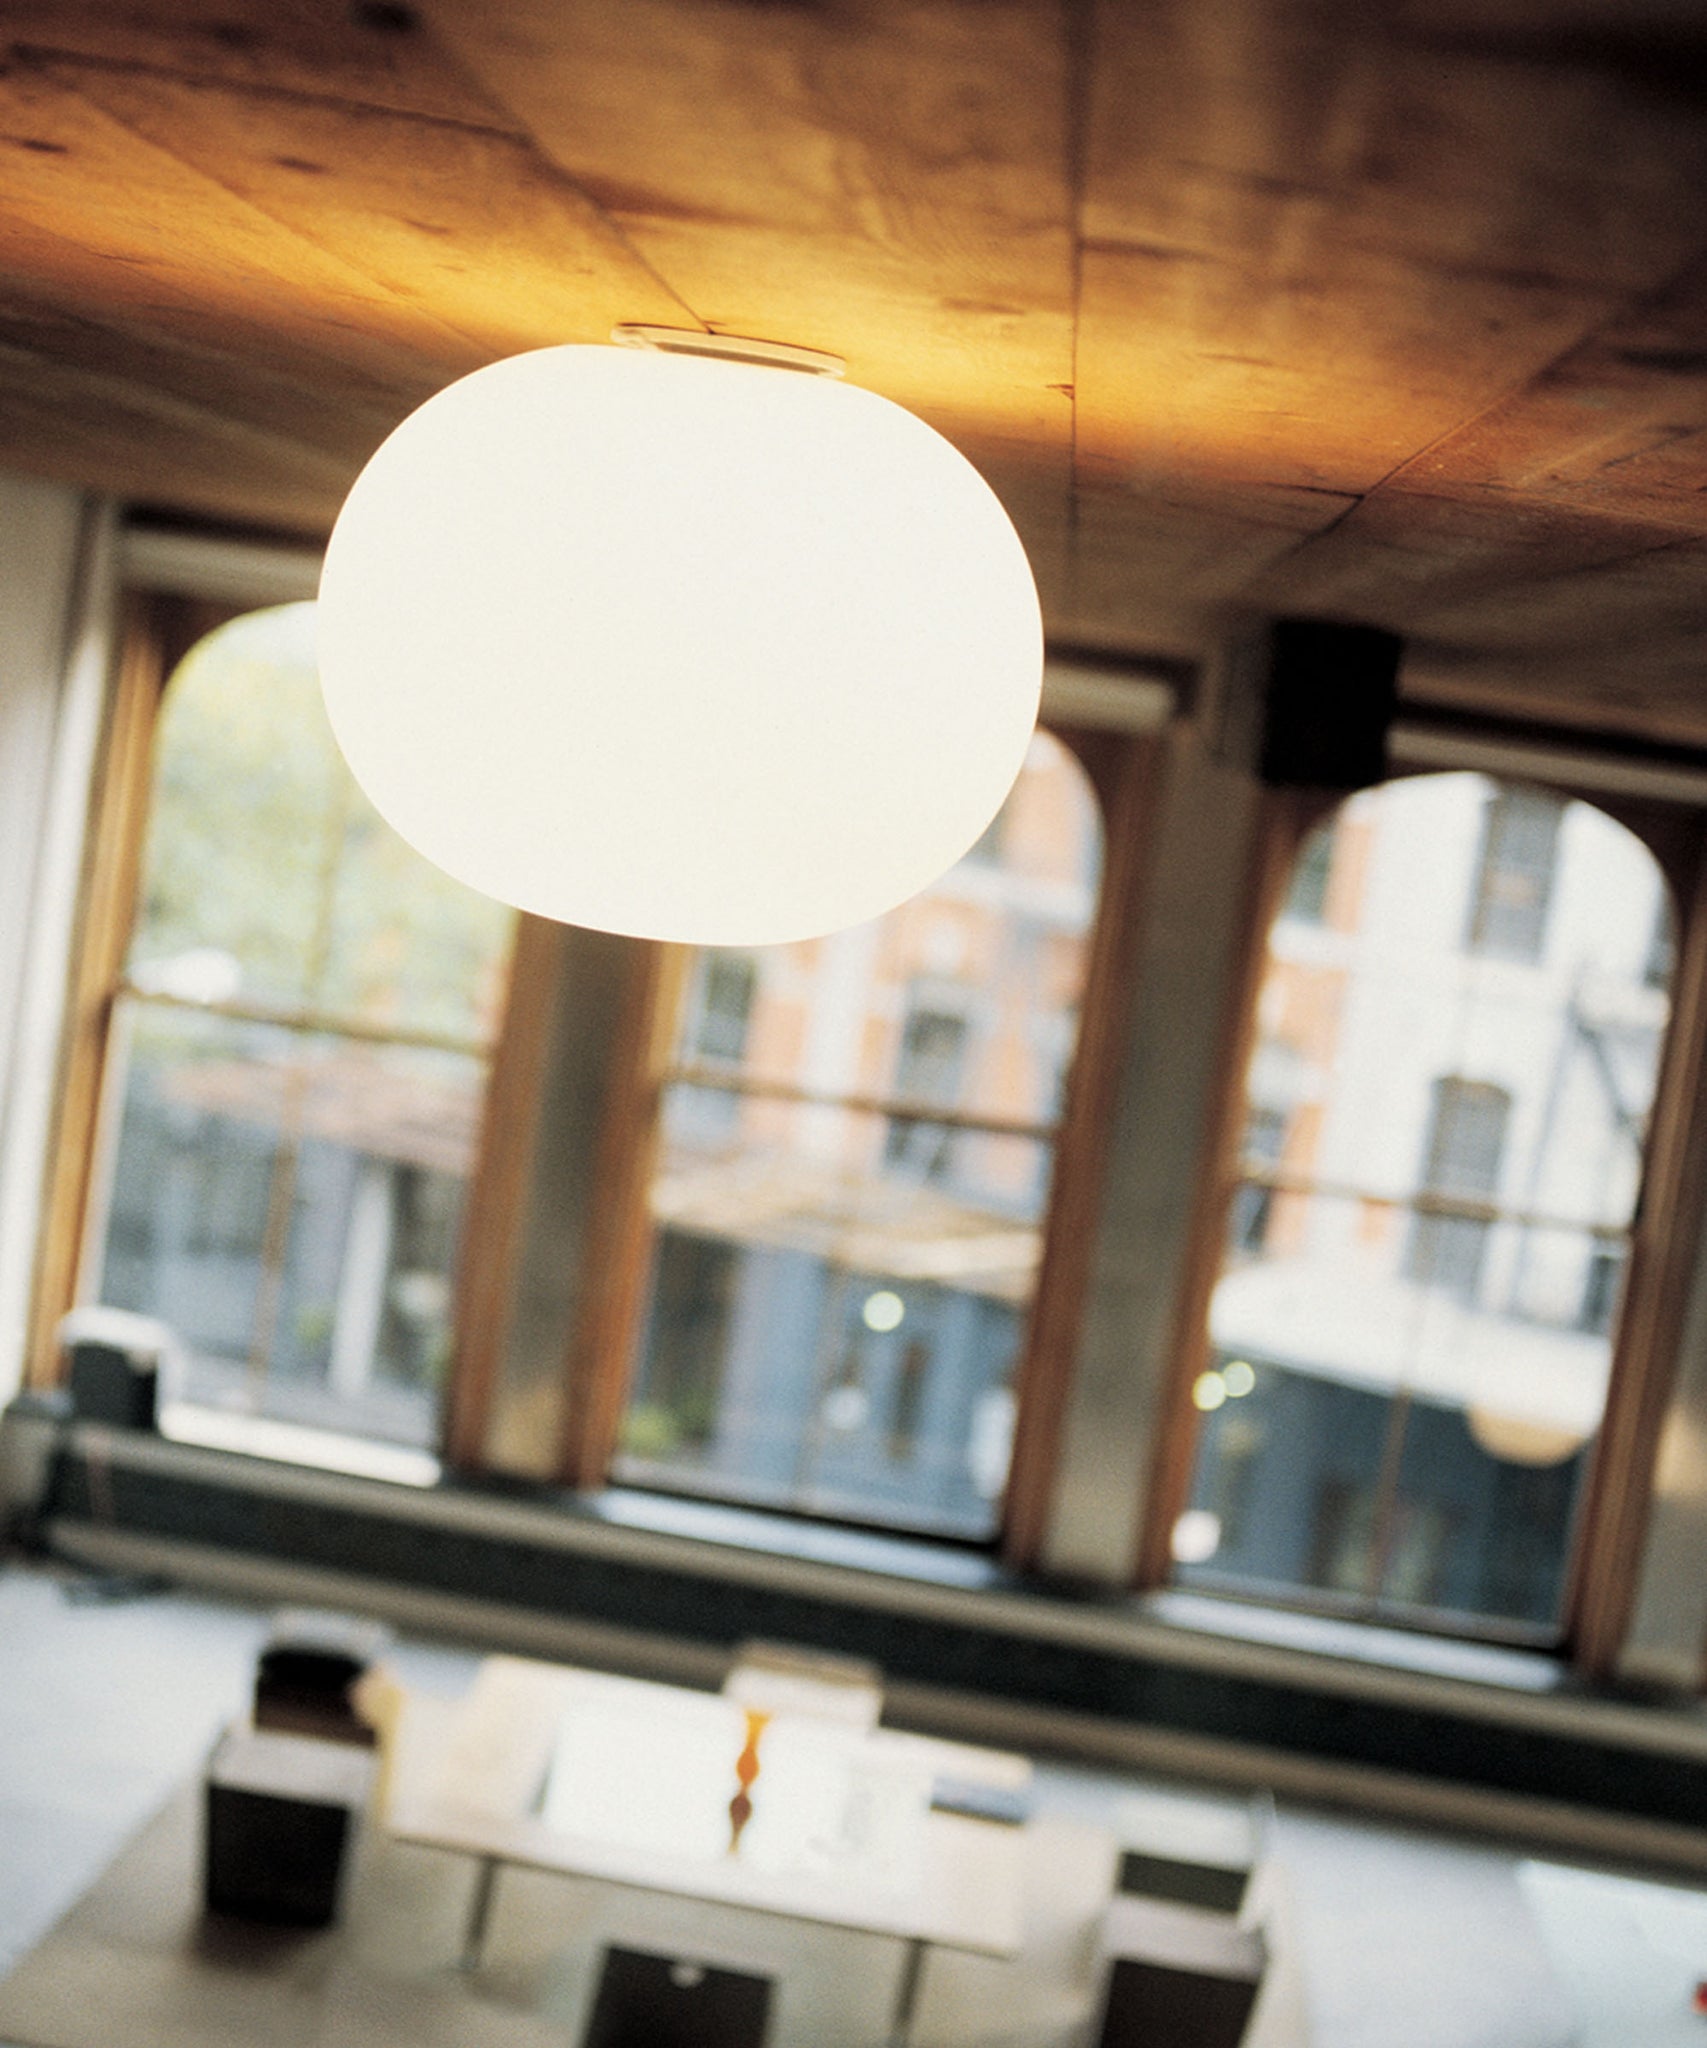 Glo Ball Ceiling Lamp